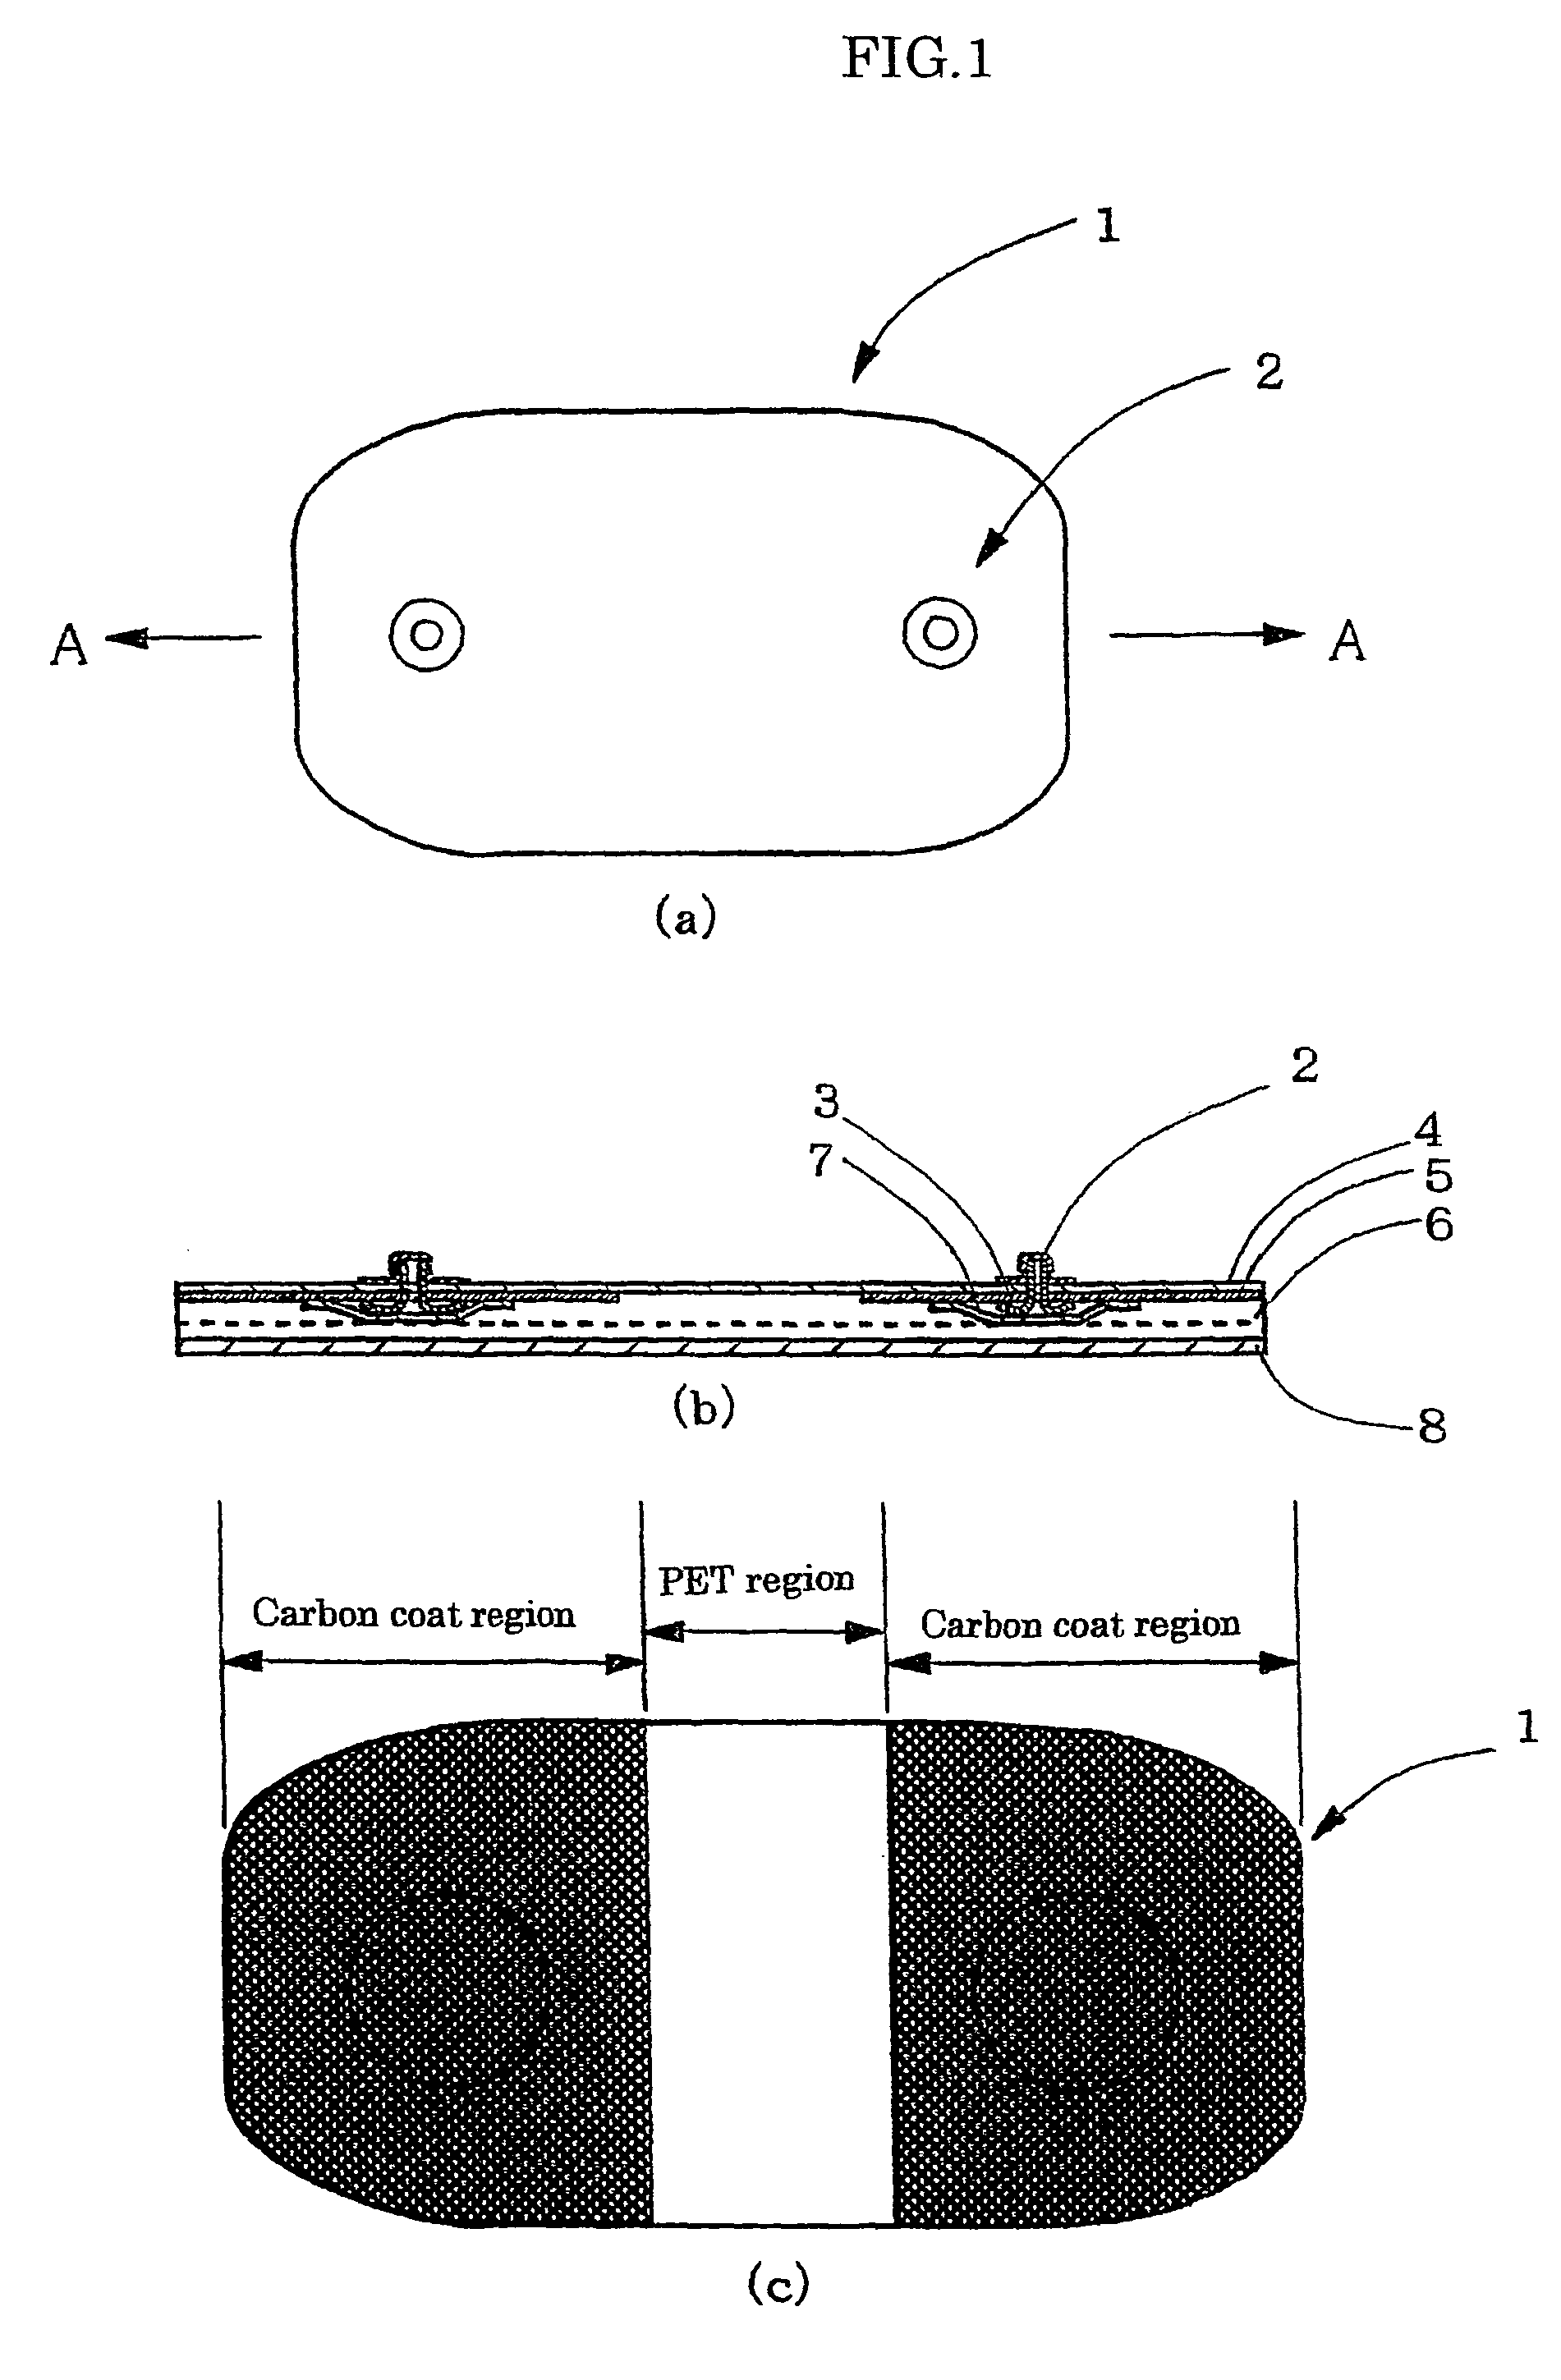 Gel adhesive compositions, method of making, and use thereof